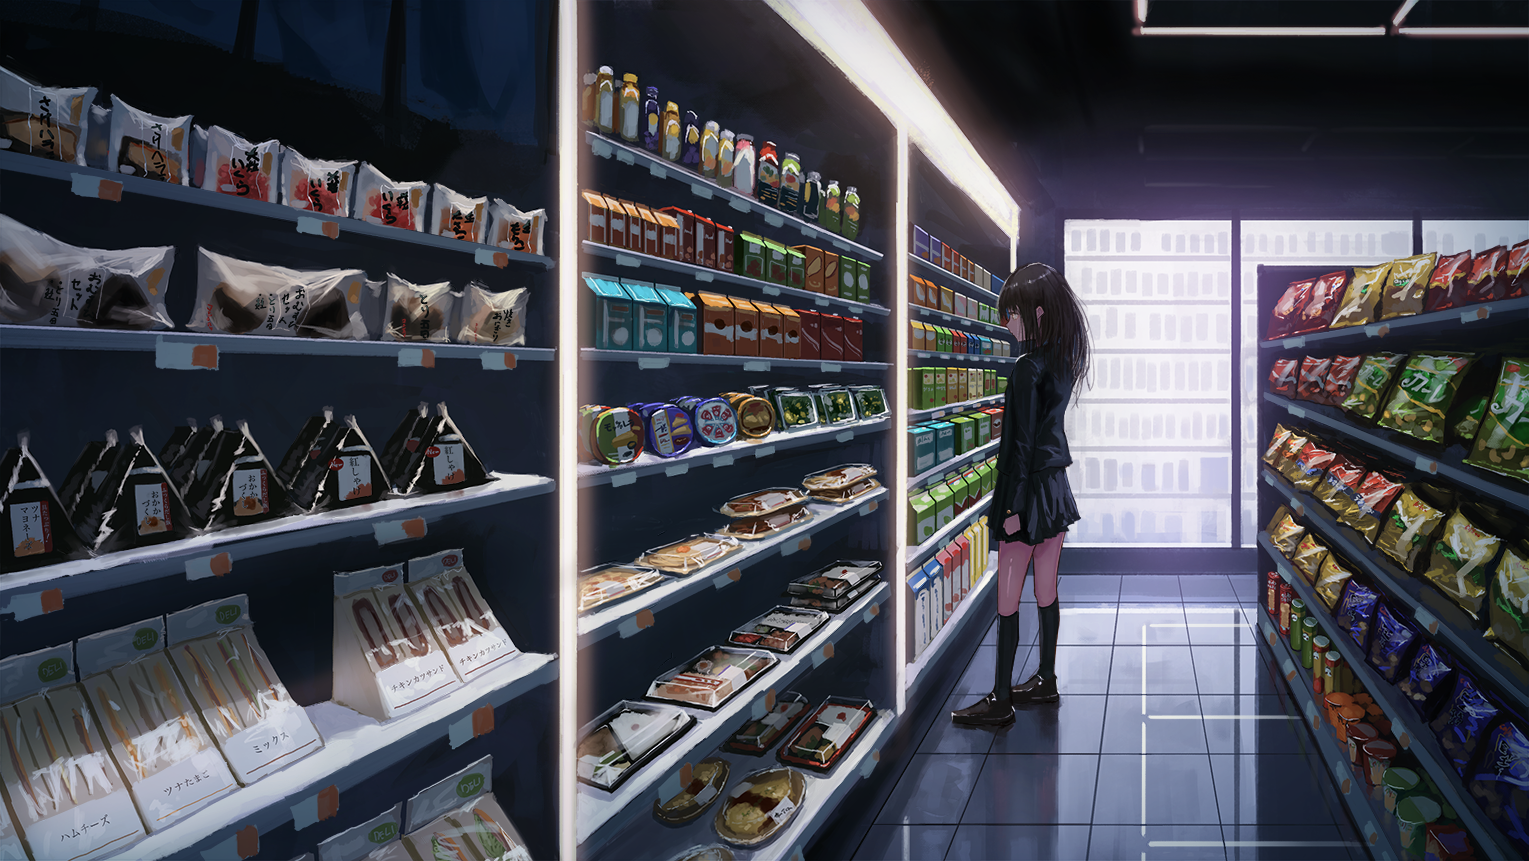 Anime 1529x861 stores food drink fridge anime lights chips kgmnx